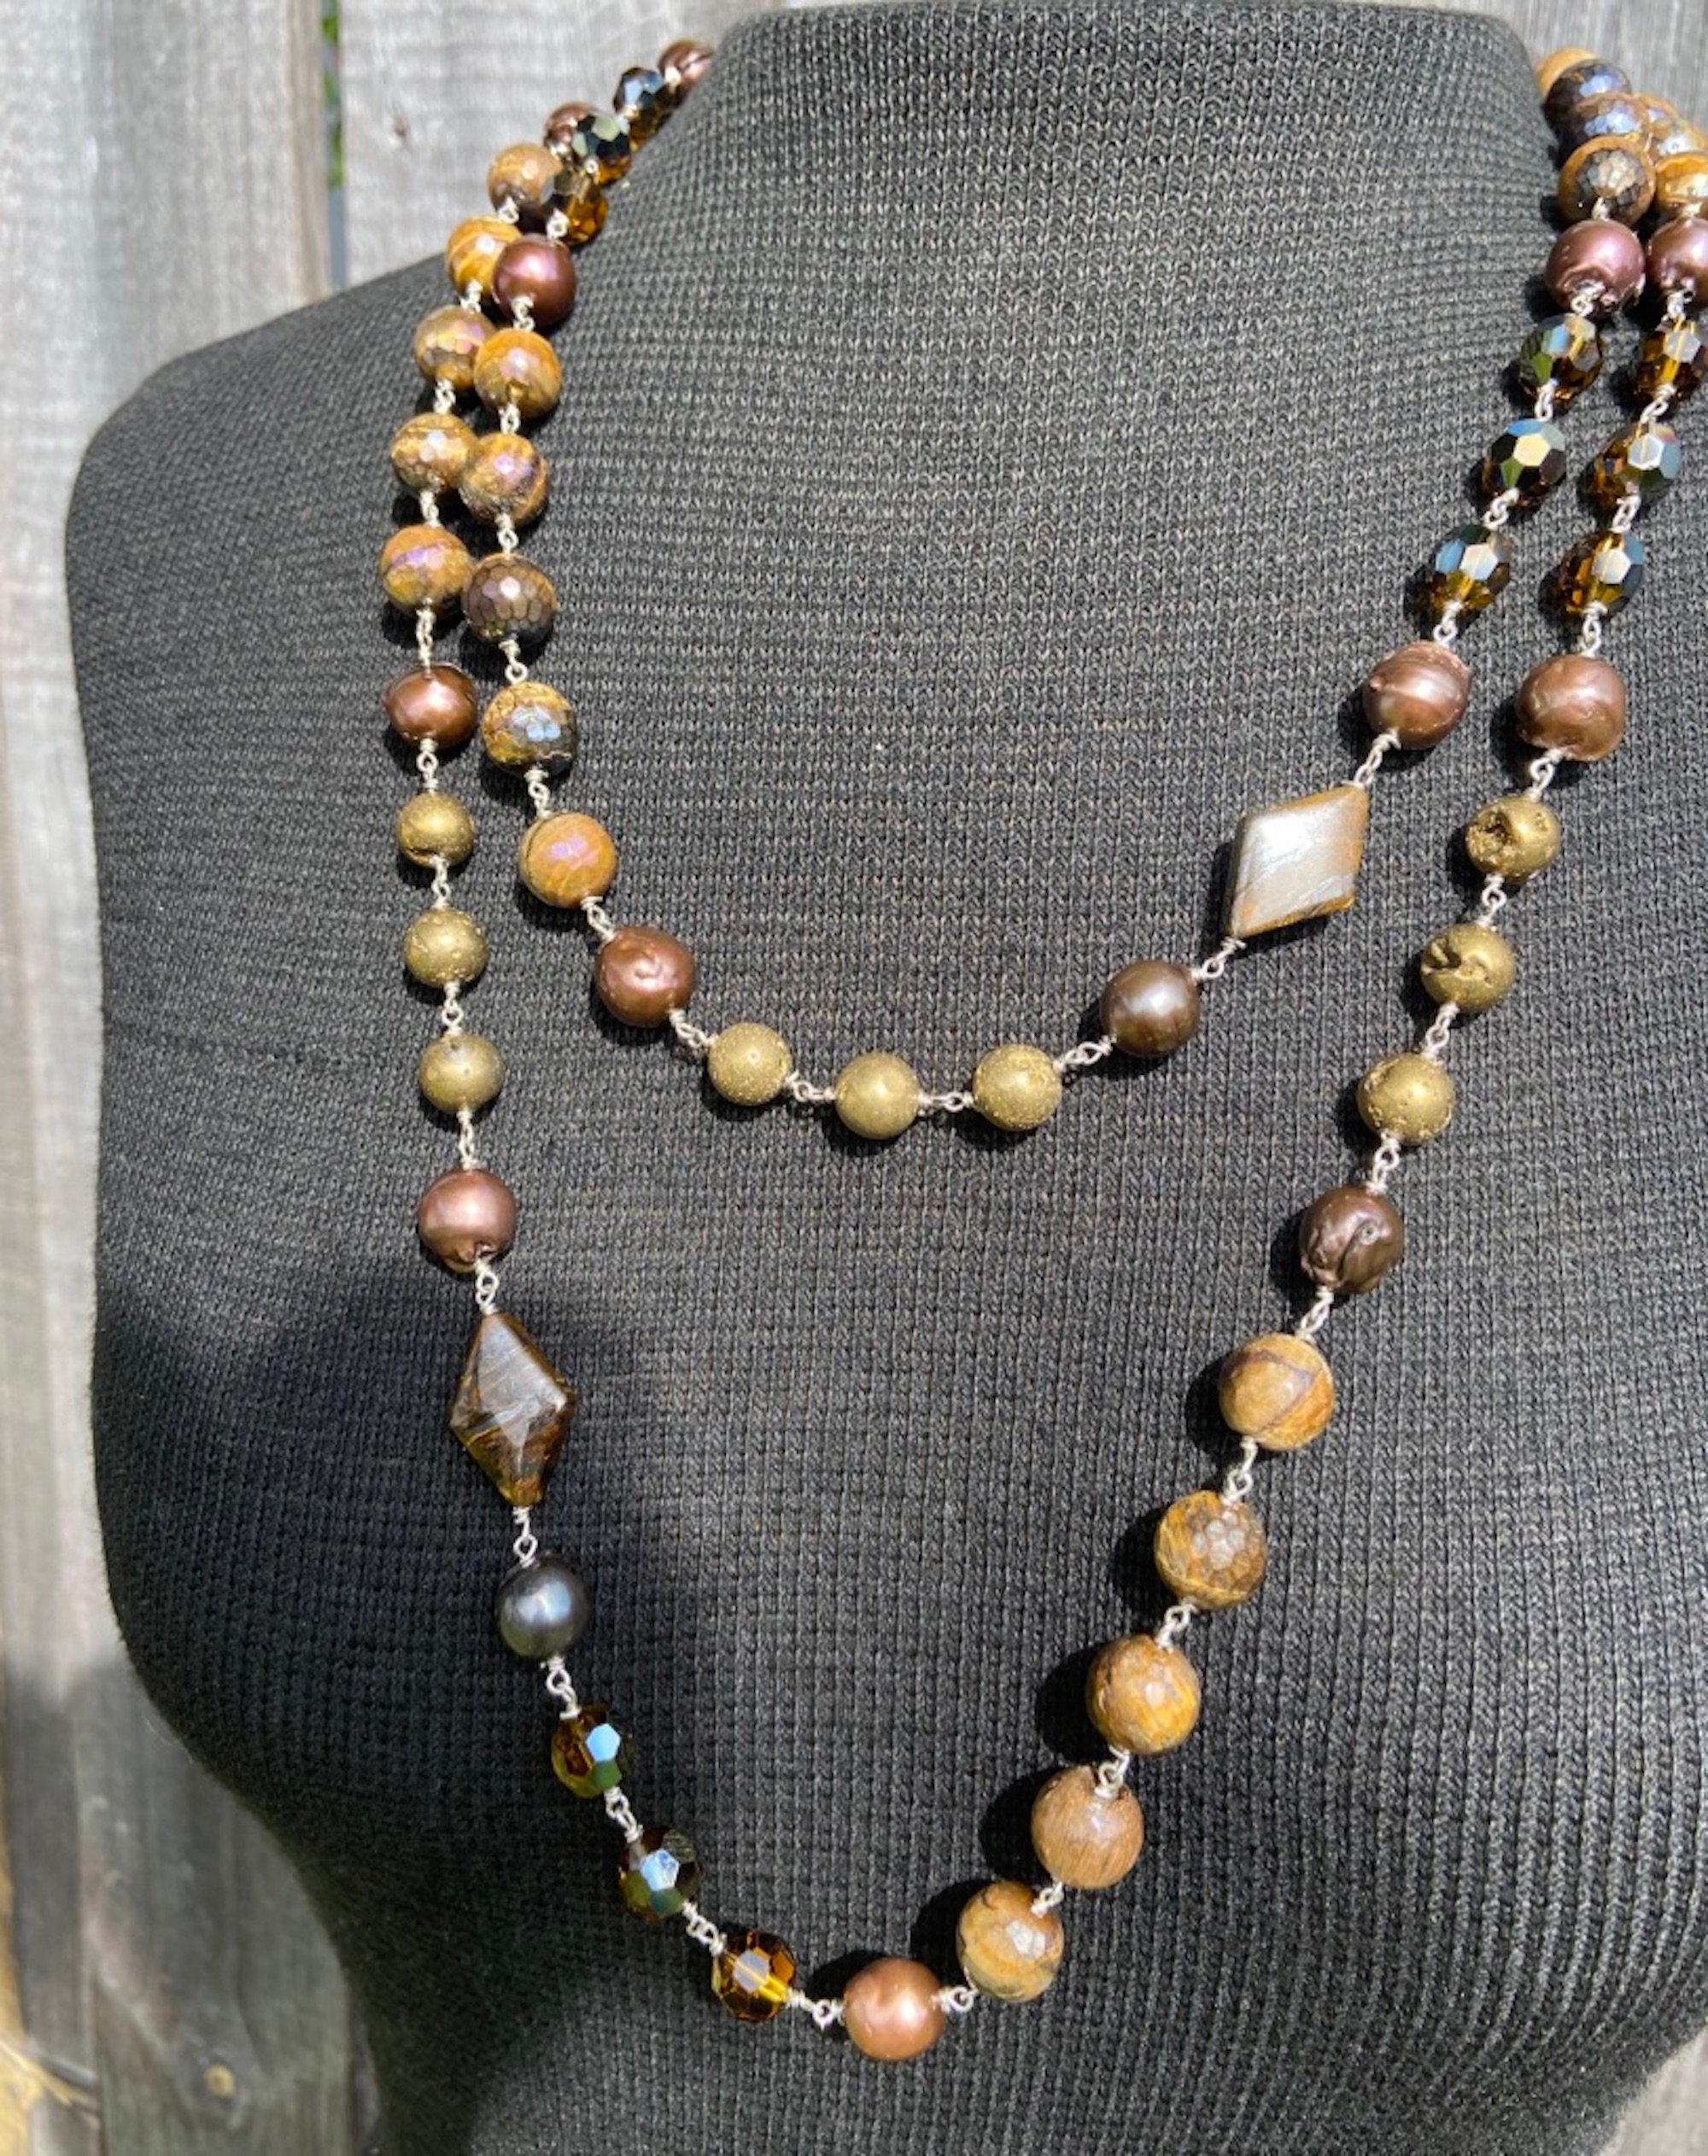 Tiger's Eye Necklace | Ursell Jewelry Art